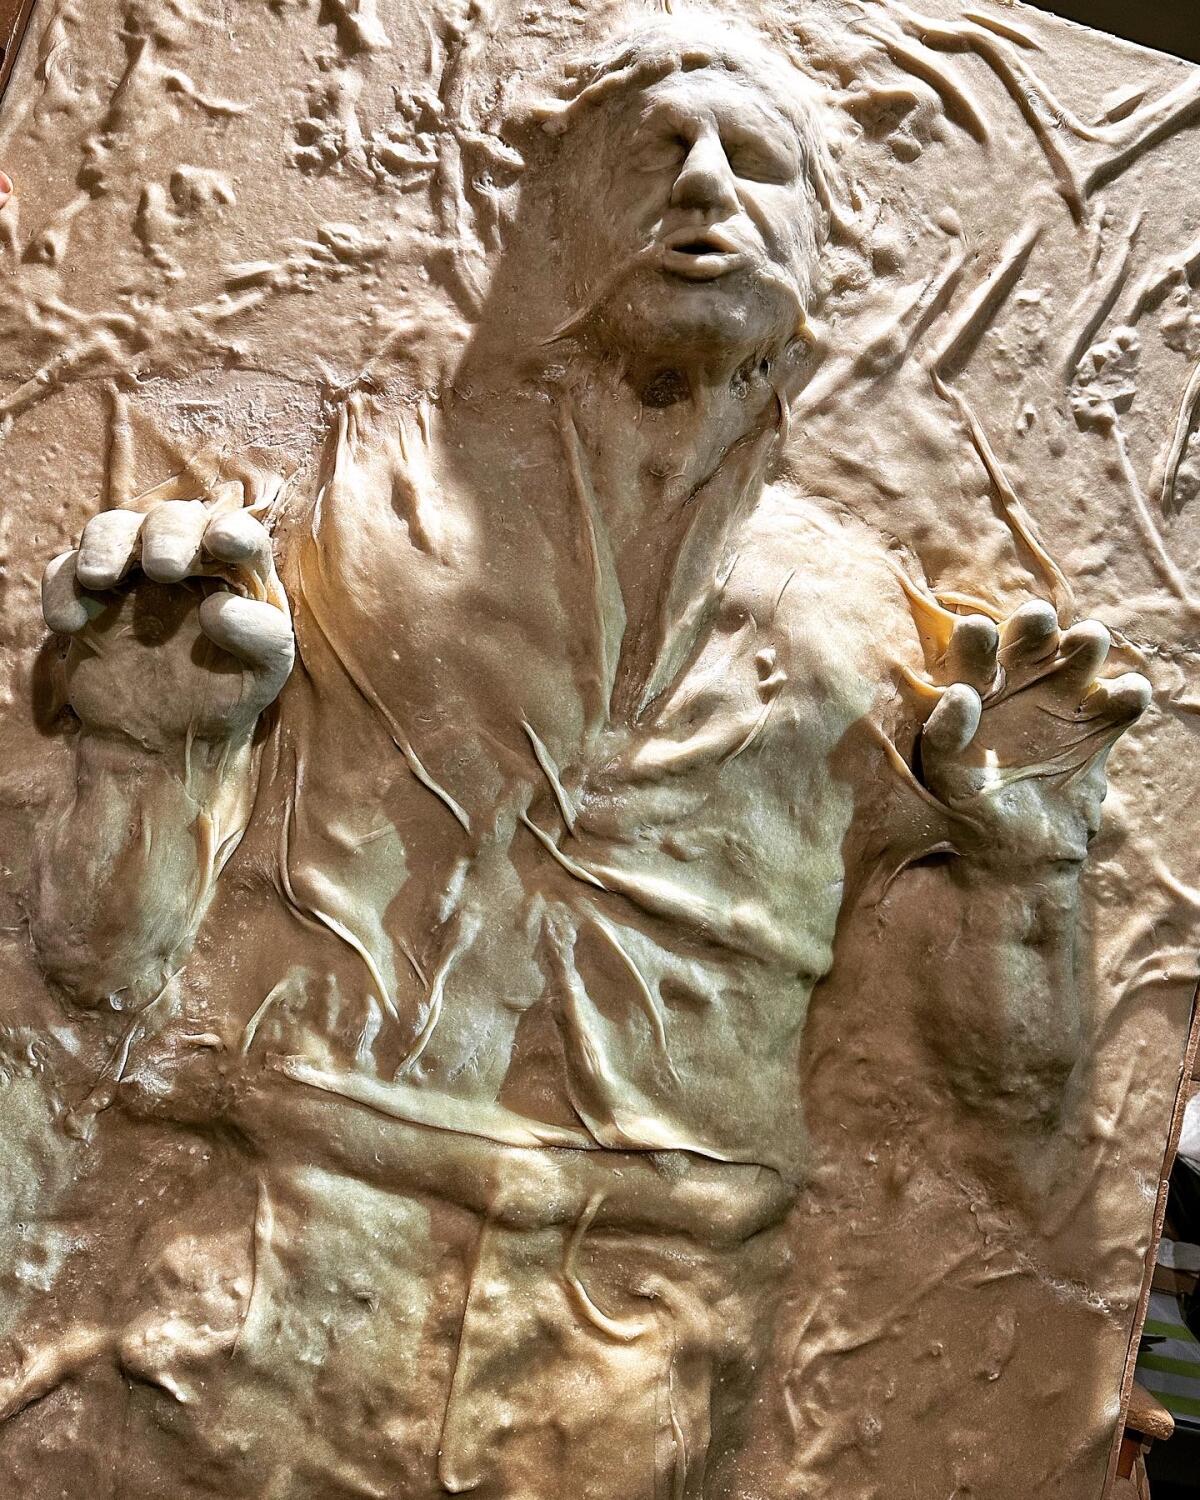 A bread sculpture depicting a man in anguish, with his hands reaching out